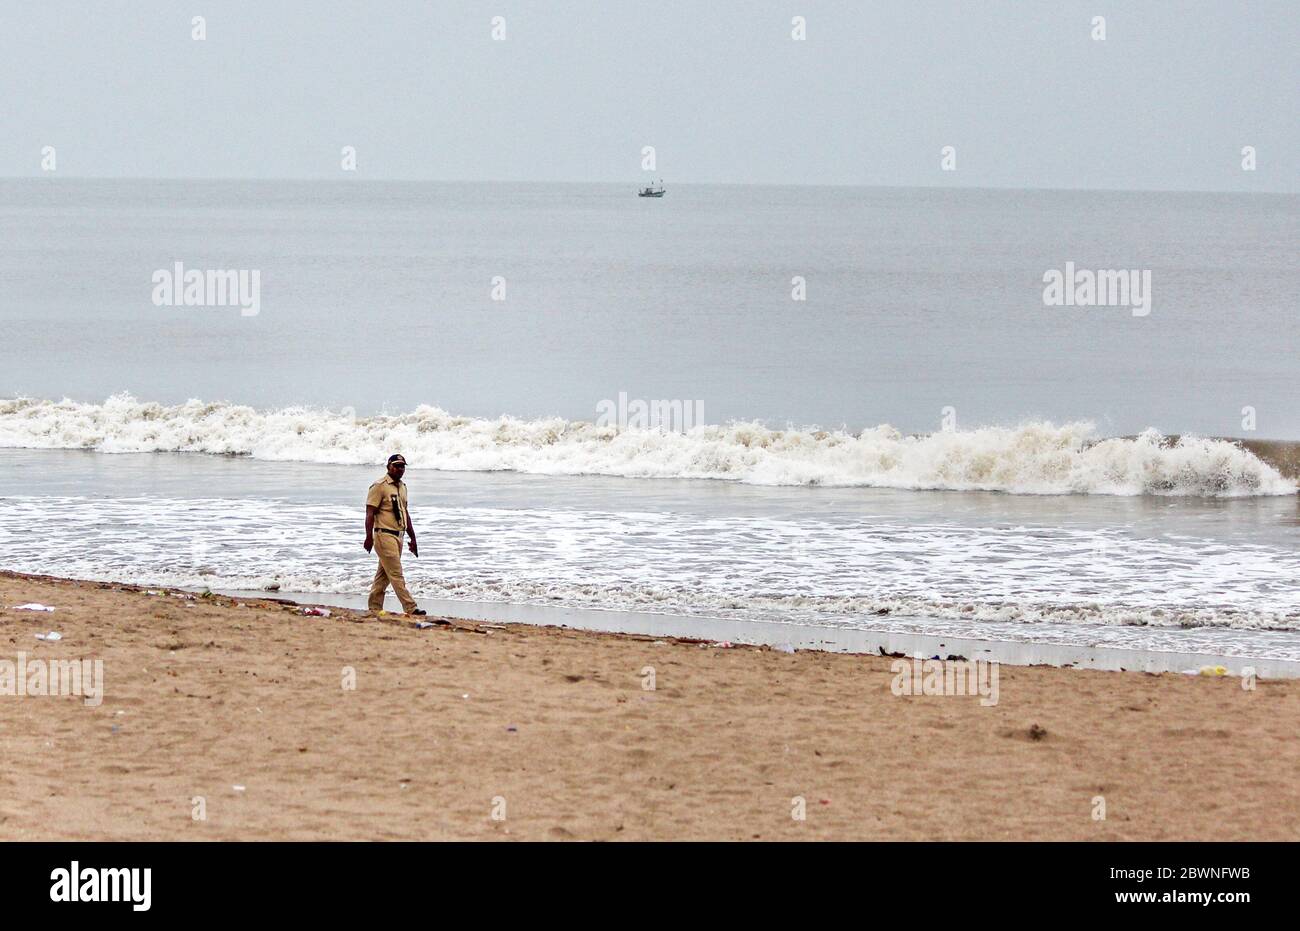 A policeman patrols the beach in preparation for the cyclone.India Meteorological Department (IMD) says that tropical cyclone ‘Nisarga’ has headed for the Maharashtra coast. People have been advised to stay indoors, be prepared to face possible power cuts as strong winds hit the city. National Disaster Response Force (NDRF) has positioned nine teams in vulnerable districts. Stock Photo